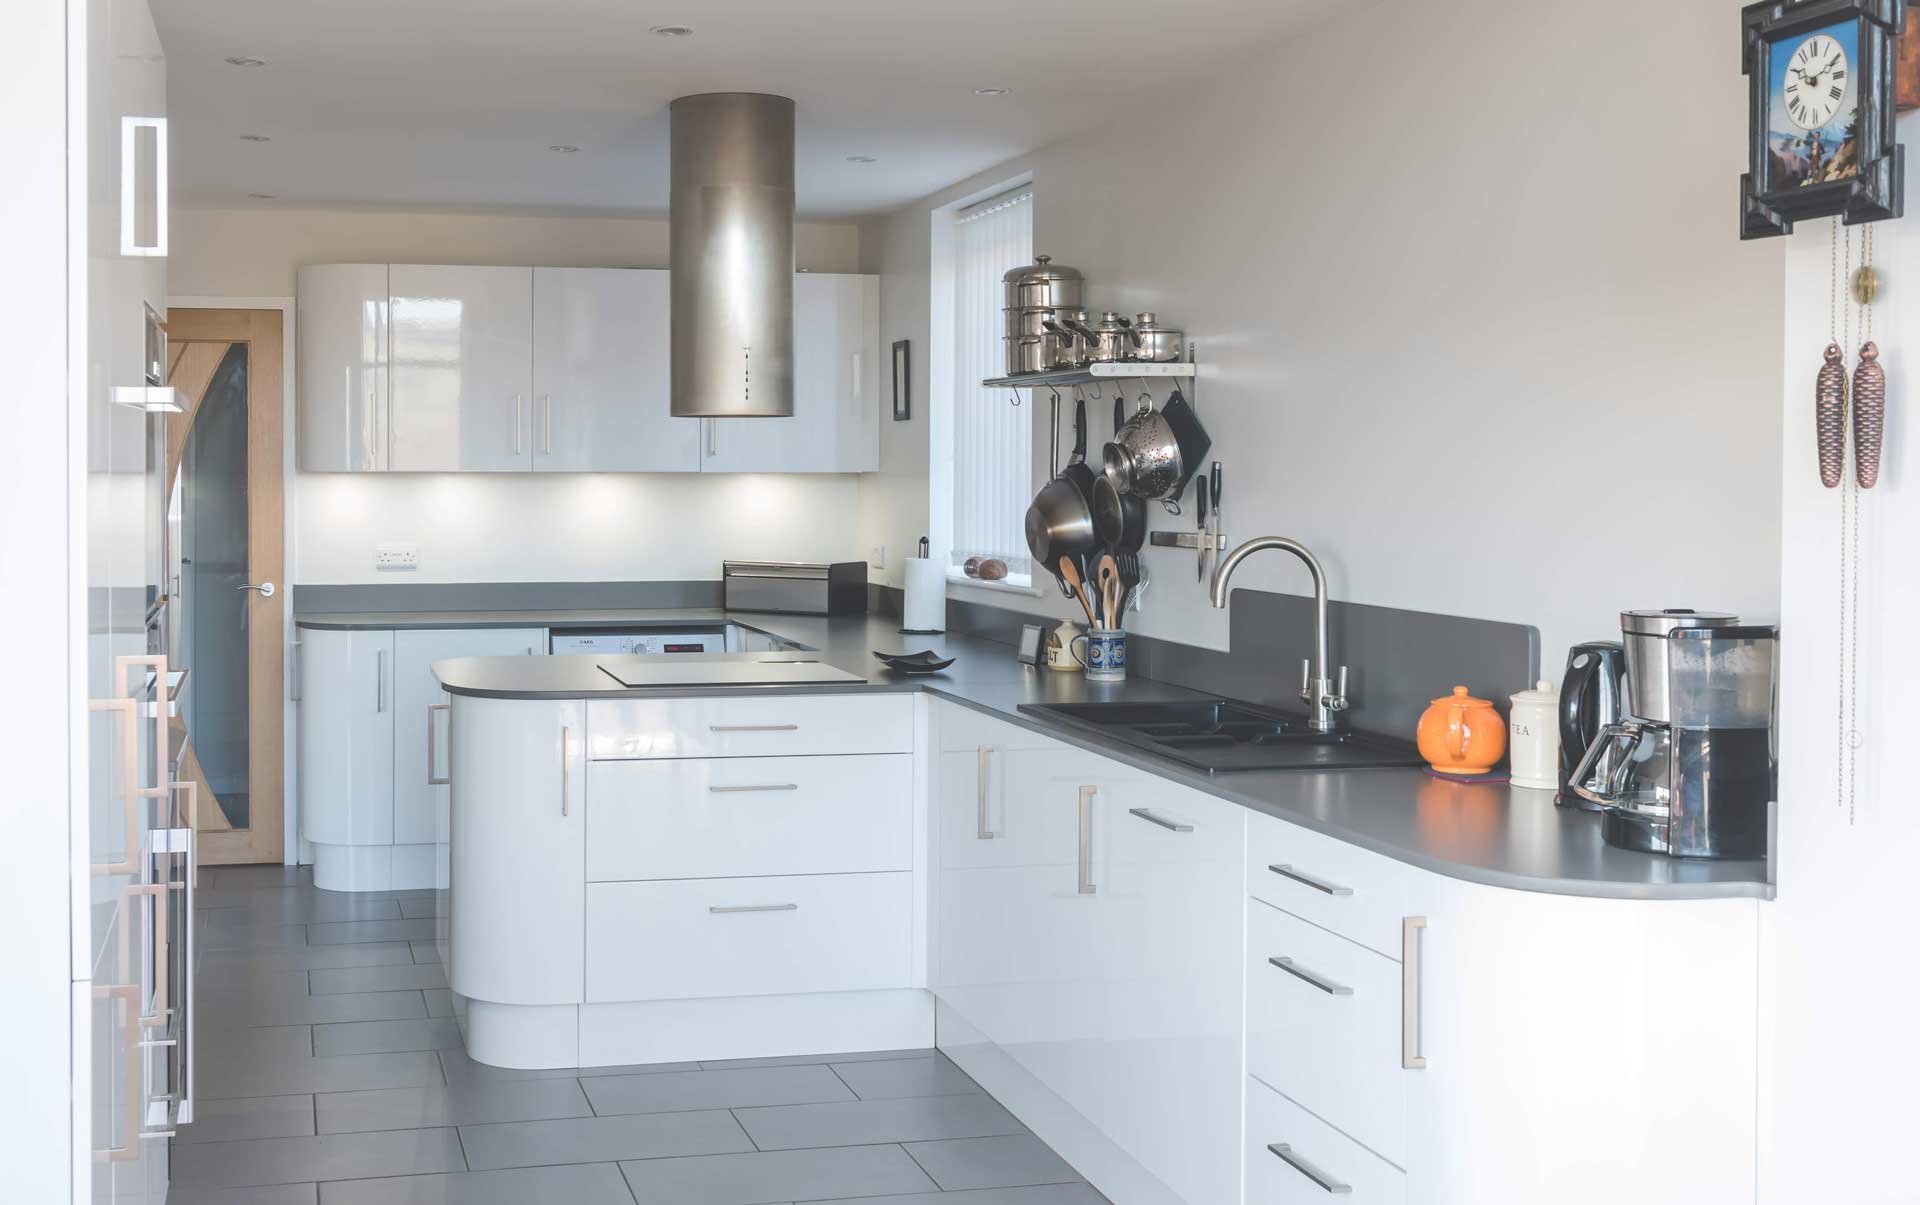 Modern Kitchen in Disley Cheshire East